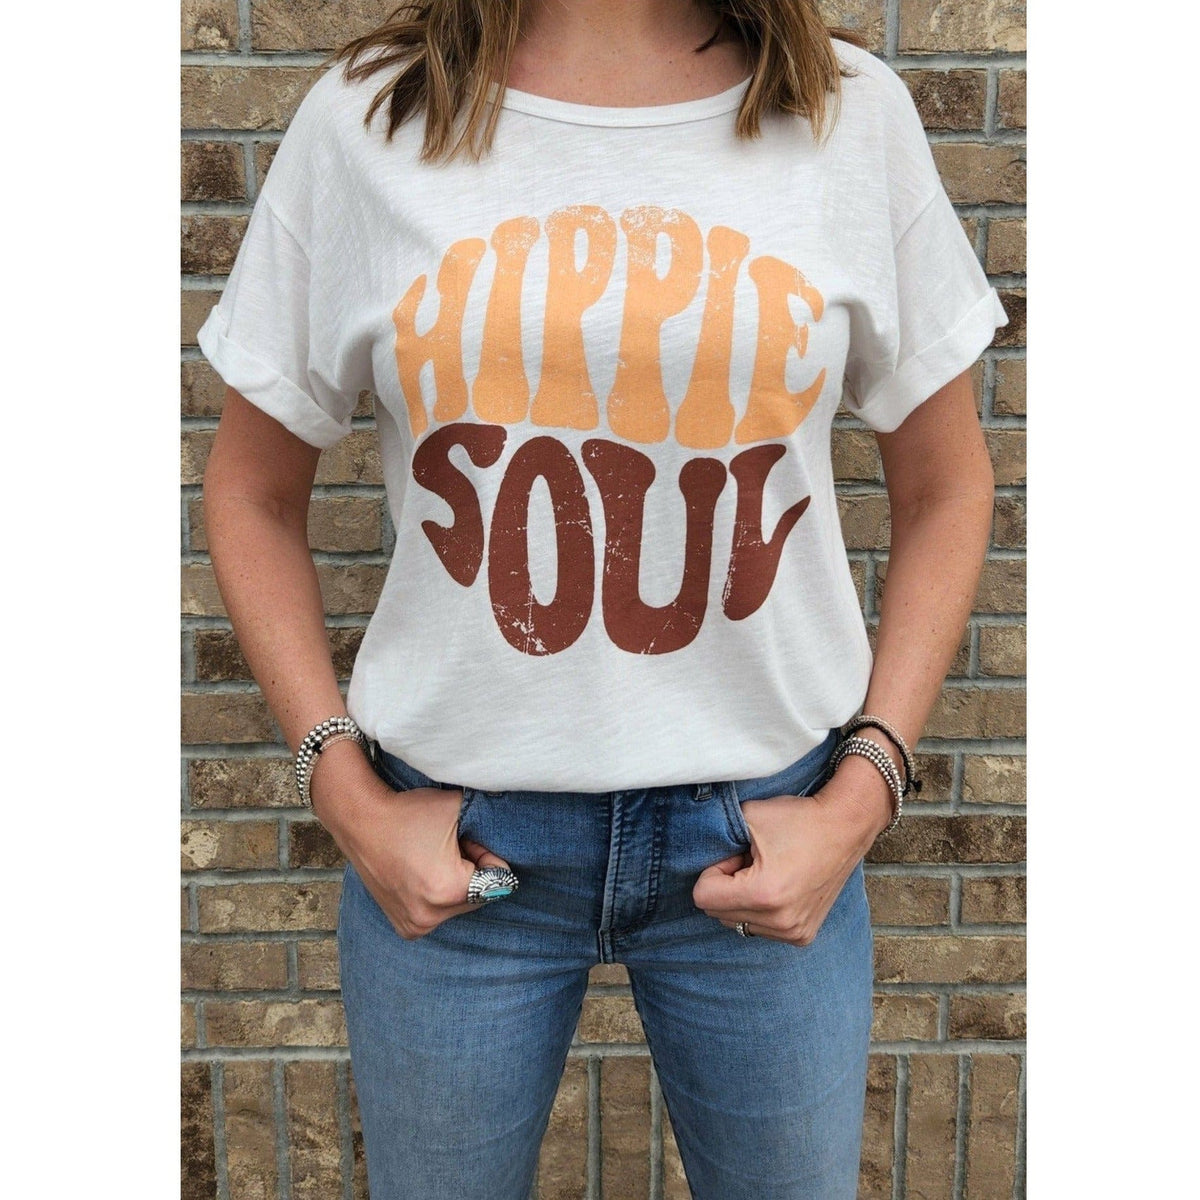 Women's Hippie Soul graphic tee Graphic T-shirt TheFringeCultureCollective